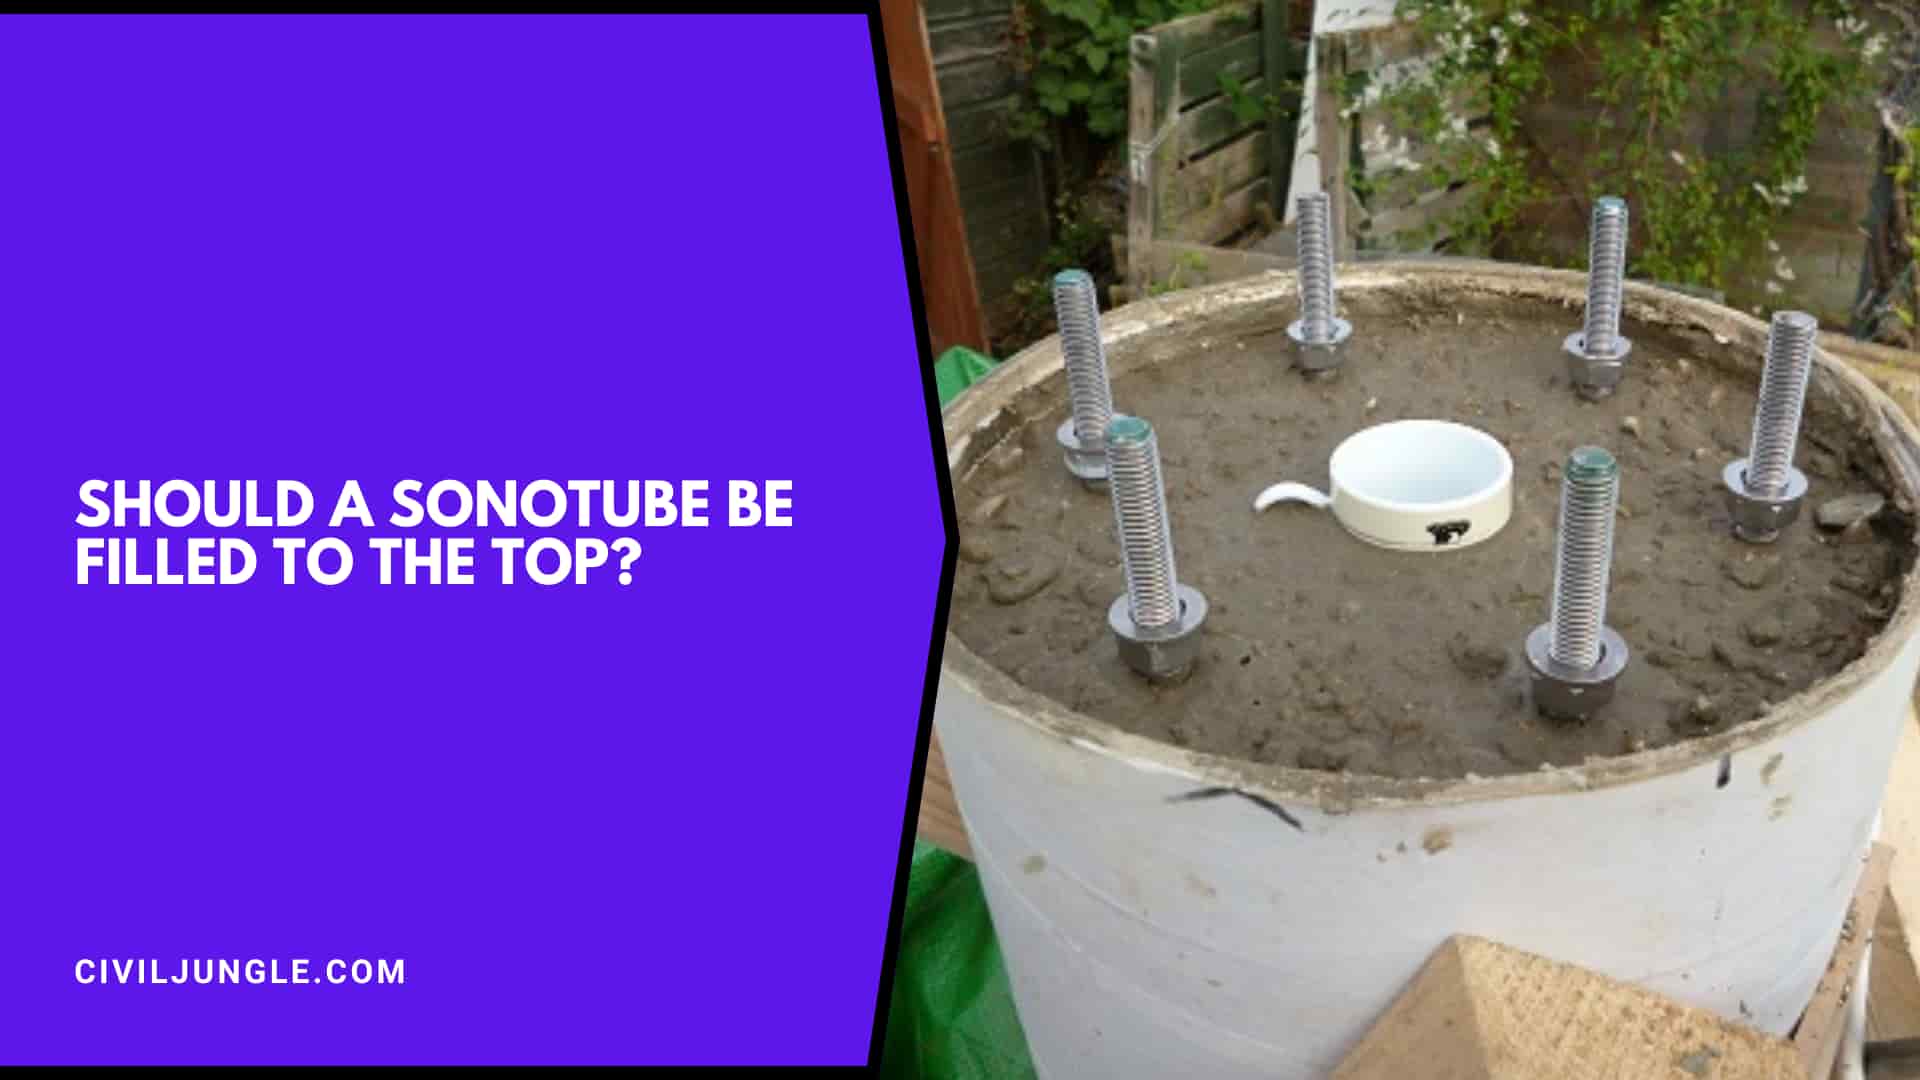 Should A Sonotube Be Filled To The Top?